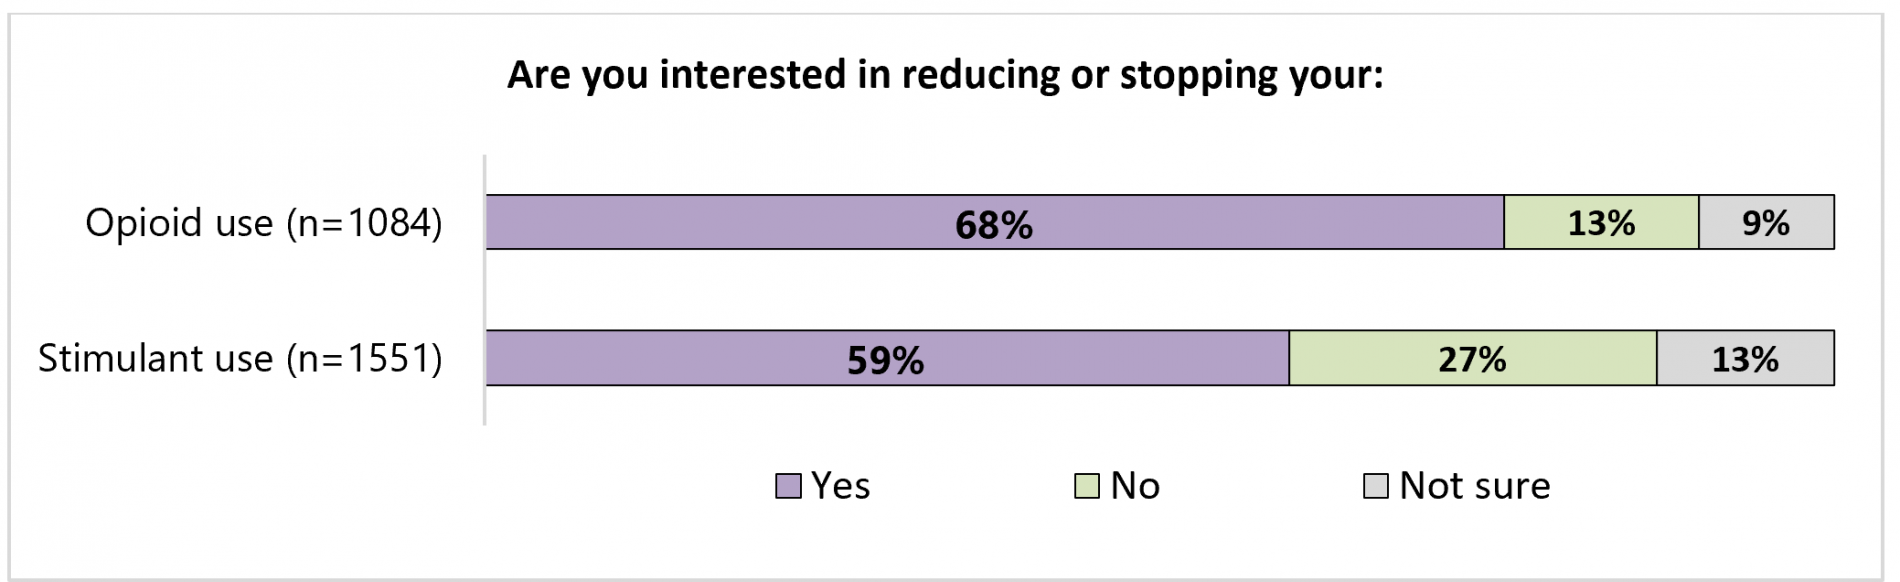 Figure 10: Are you interested in reducing or stopping your: Opioid use (n=1084). Yes: 68%, No: 13%, Not sure: 9%. Stimulant use (n=1551). Yes: 59%, No: 27%, Not sure: 13%.